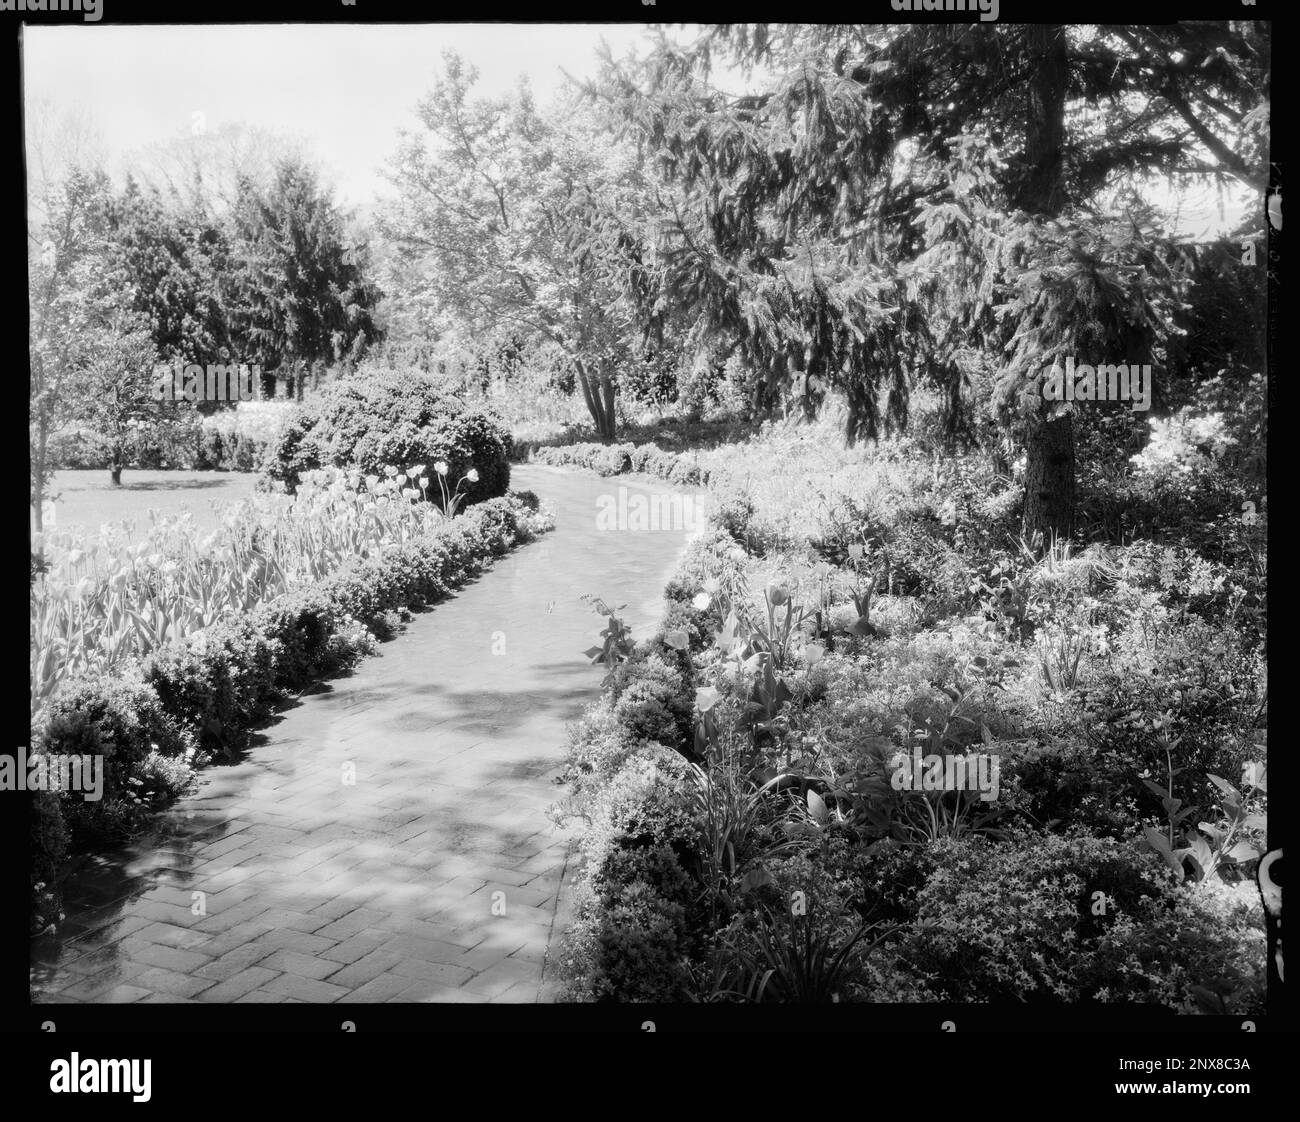 Rose Hill, Greenwood, Albemarle County, Virginia. Carnegie Survey of the Architecture of the South. United States  Virginia  Albemarle County  Greenwood, Trails & paths, Gardens. Stock Photo